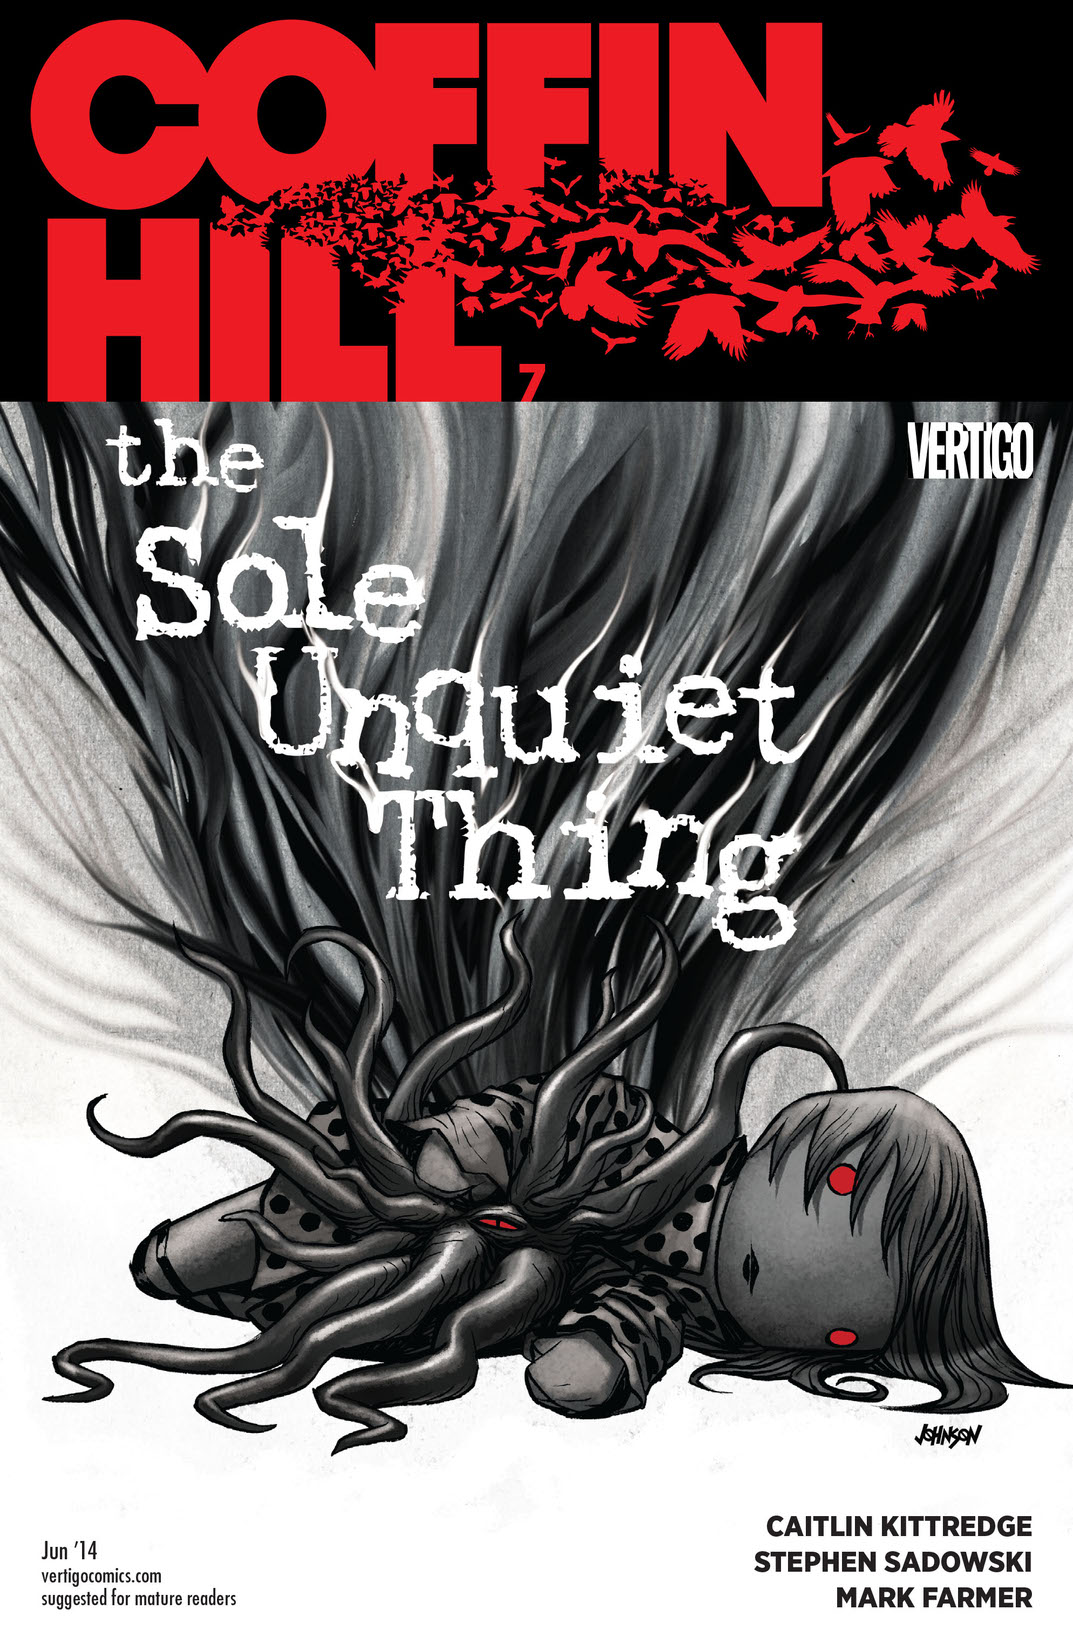 Coffin Hill #7 preview images